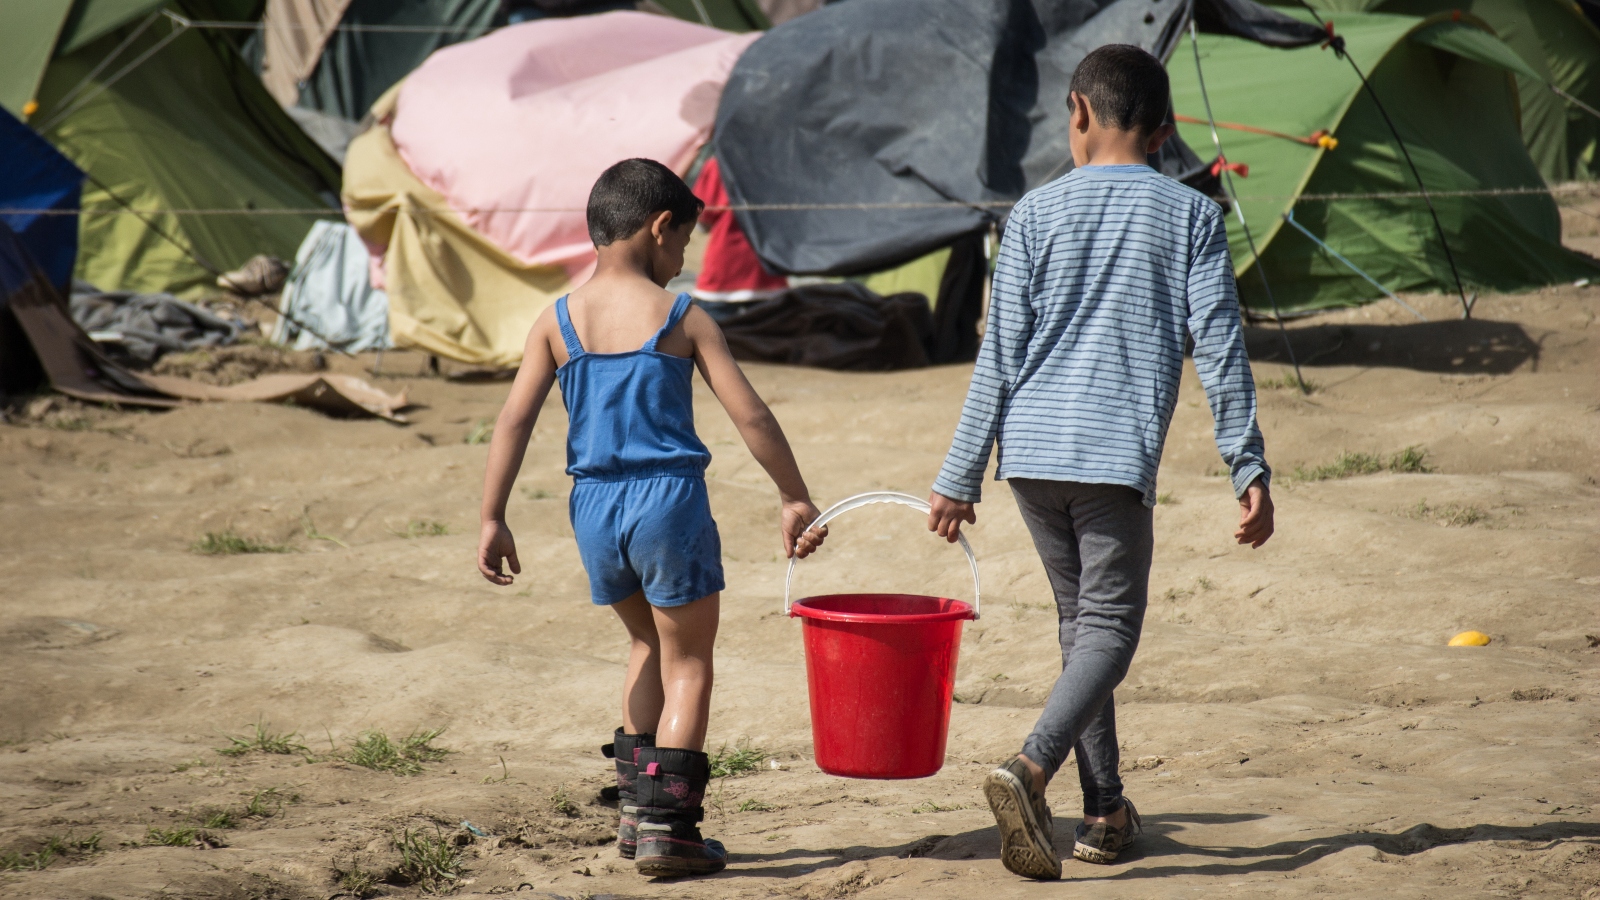 Two young children carry a bucket of water in front of tents